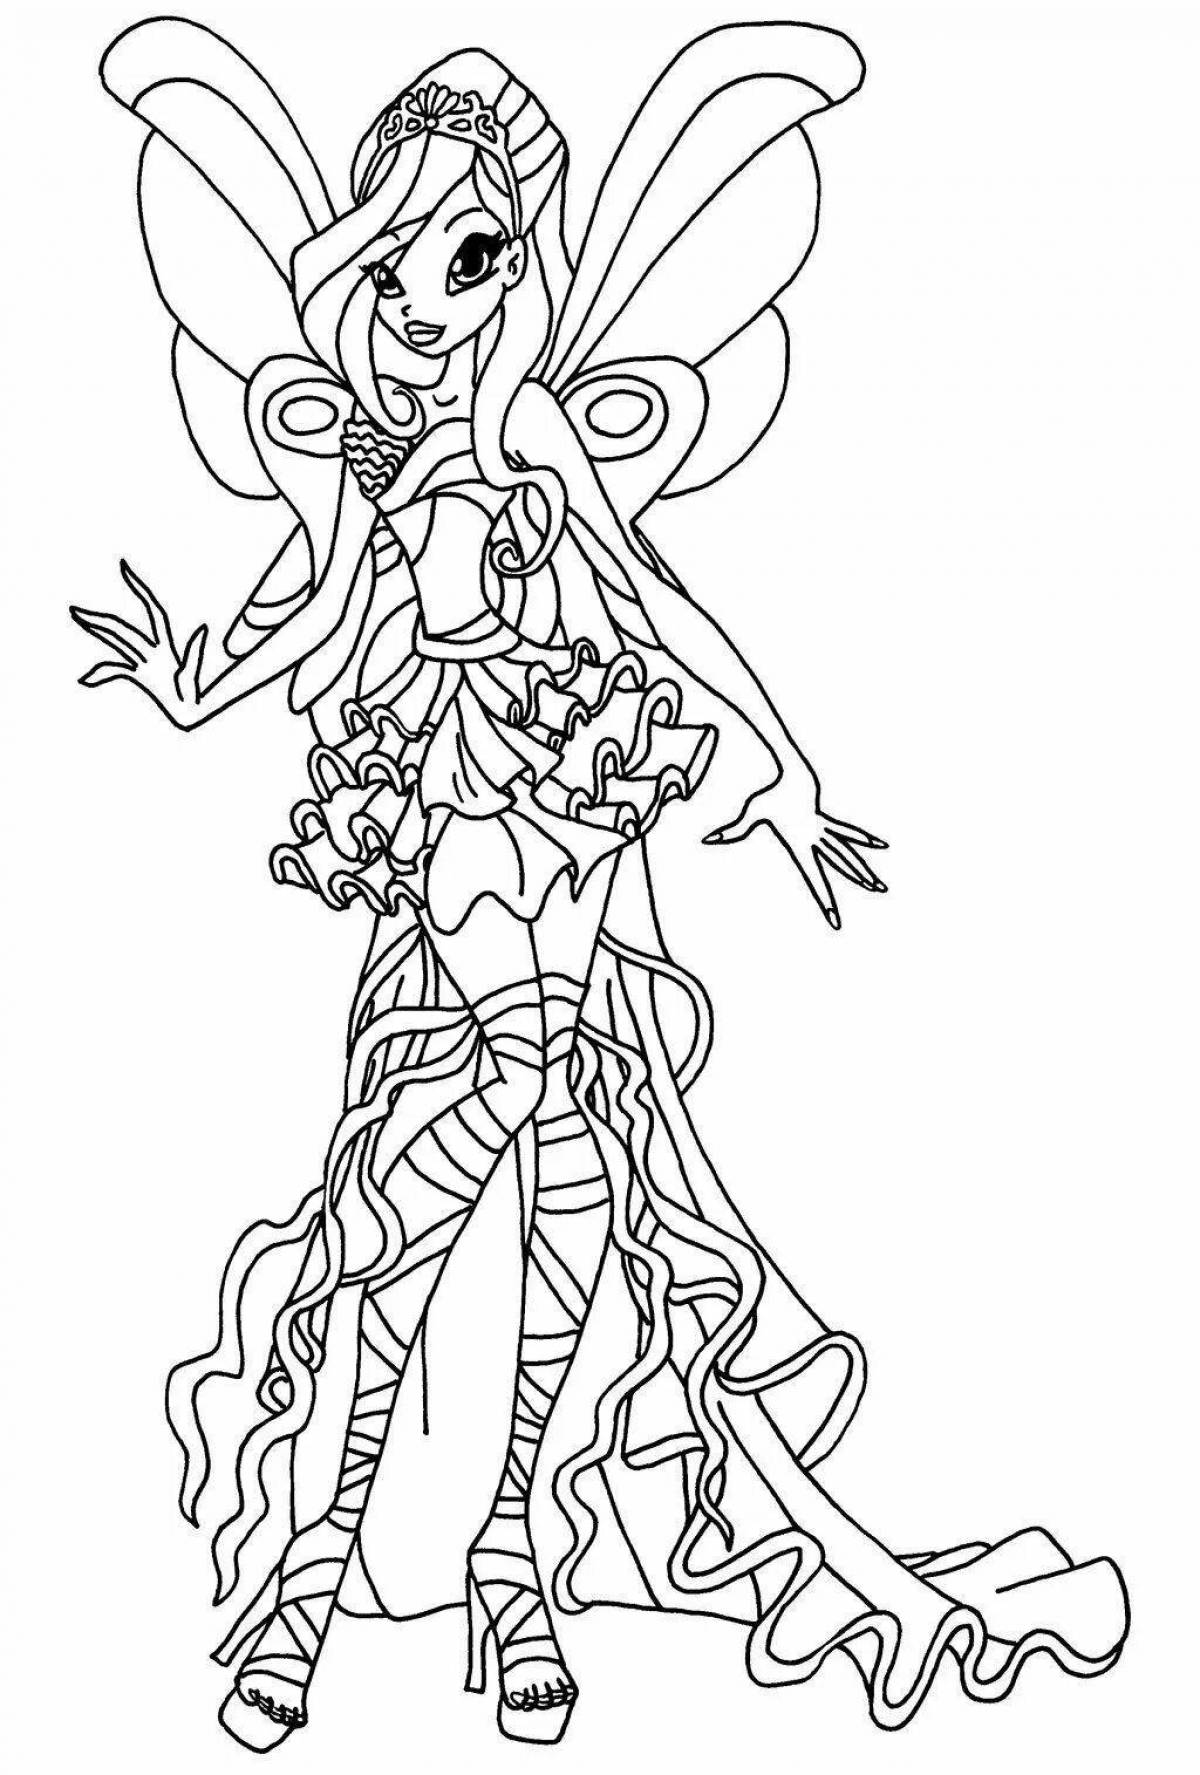 Winx glowing coloring book